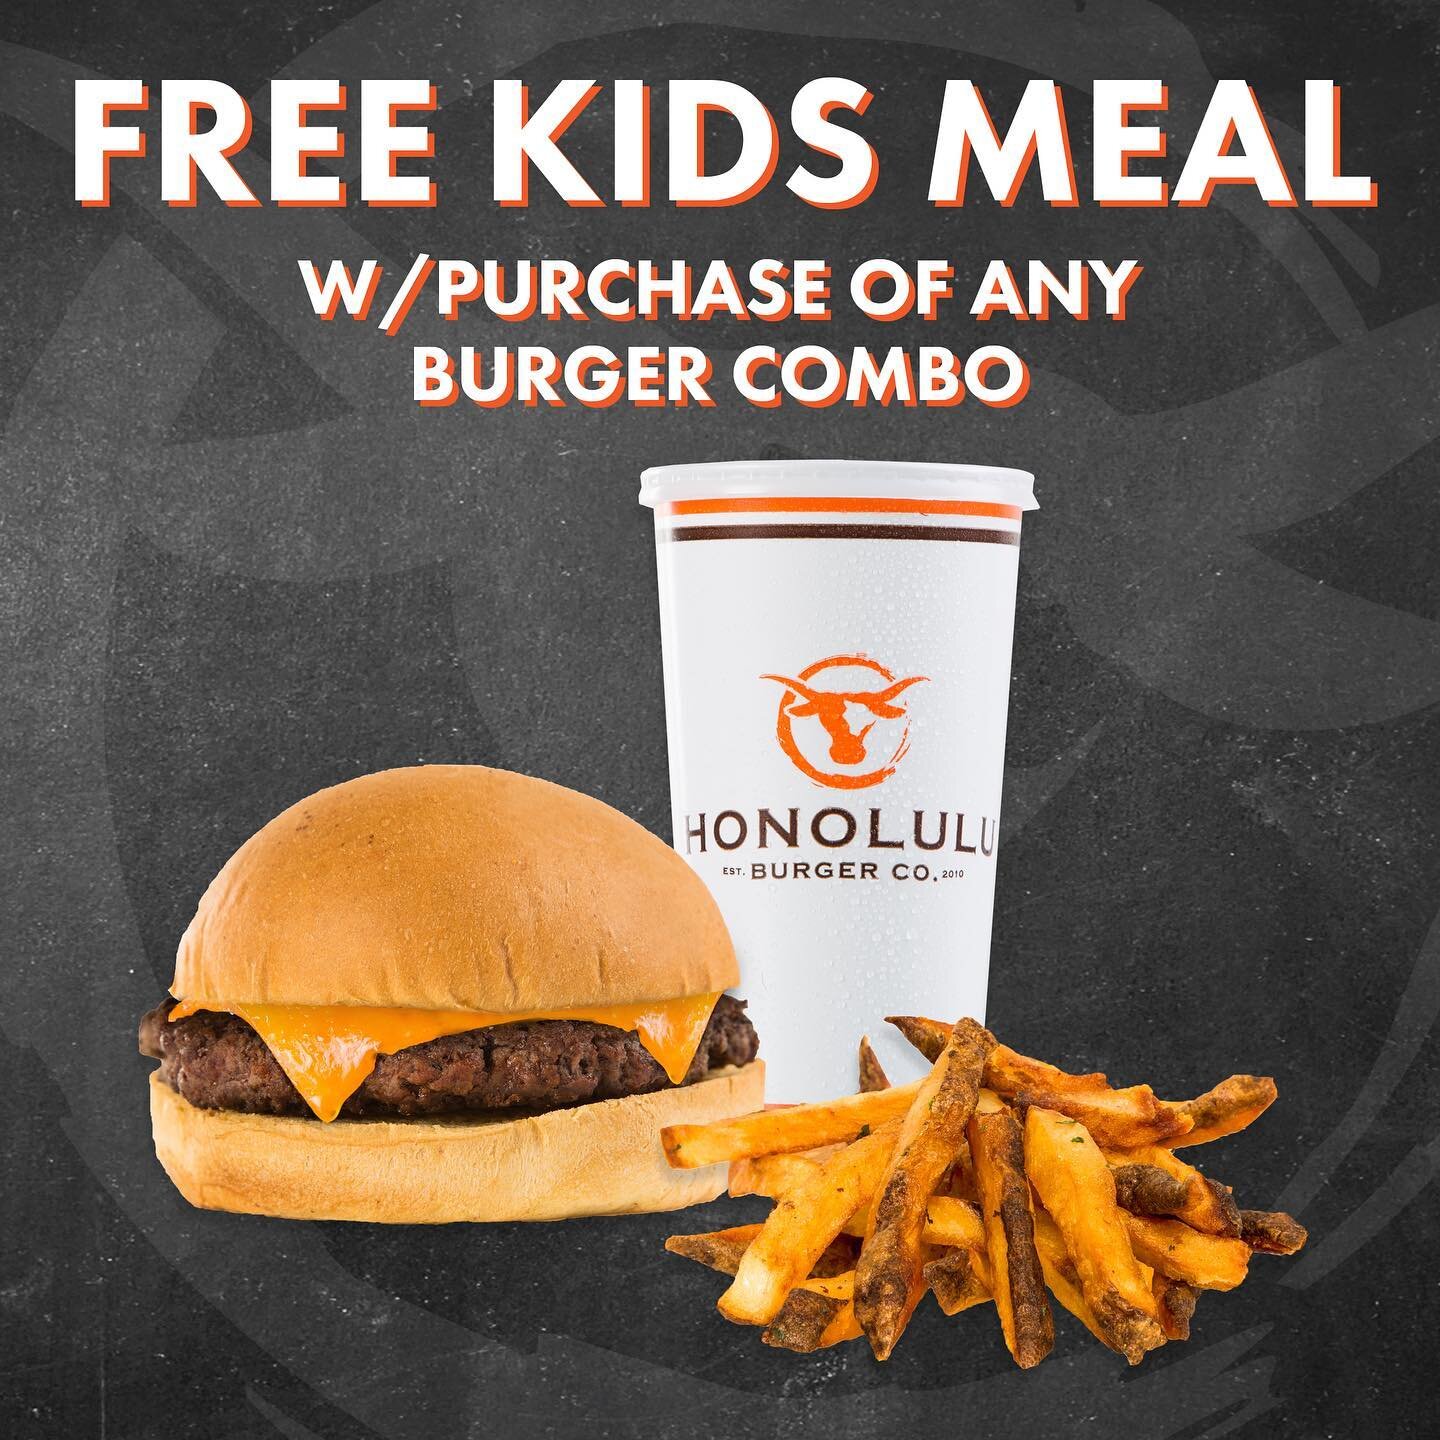 🚨 FREE KIDS MEAL 🚨 

Kids Meal = Hamburger, Cheeseburger or Grilled Cheese + Fries + Small Soft Drink.
For the children, ages 13 and under.

Available at our Waialae location until end of day, Sunday, November 6! 

*Cannot be combined with other di